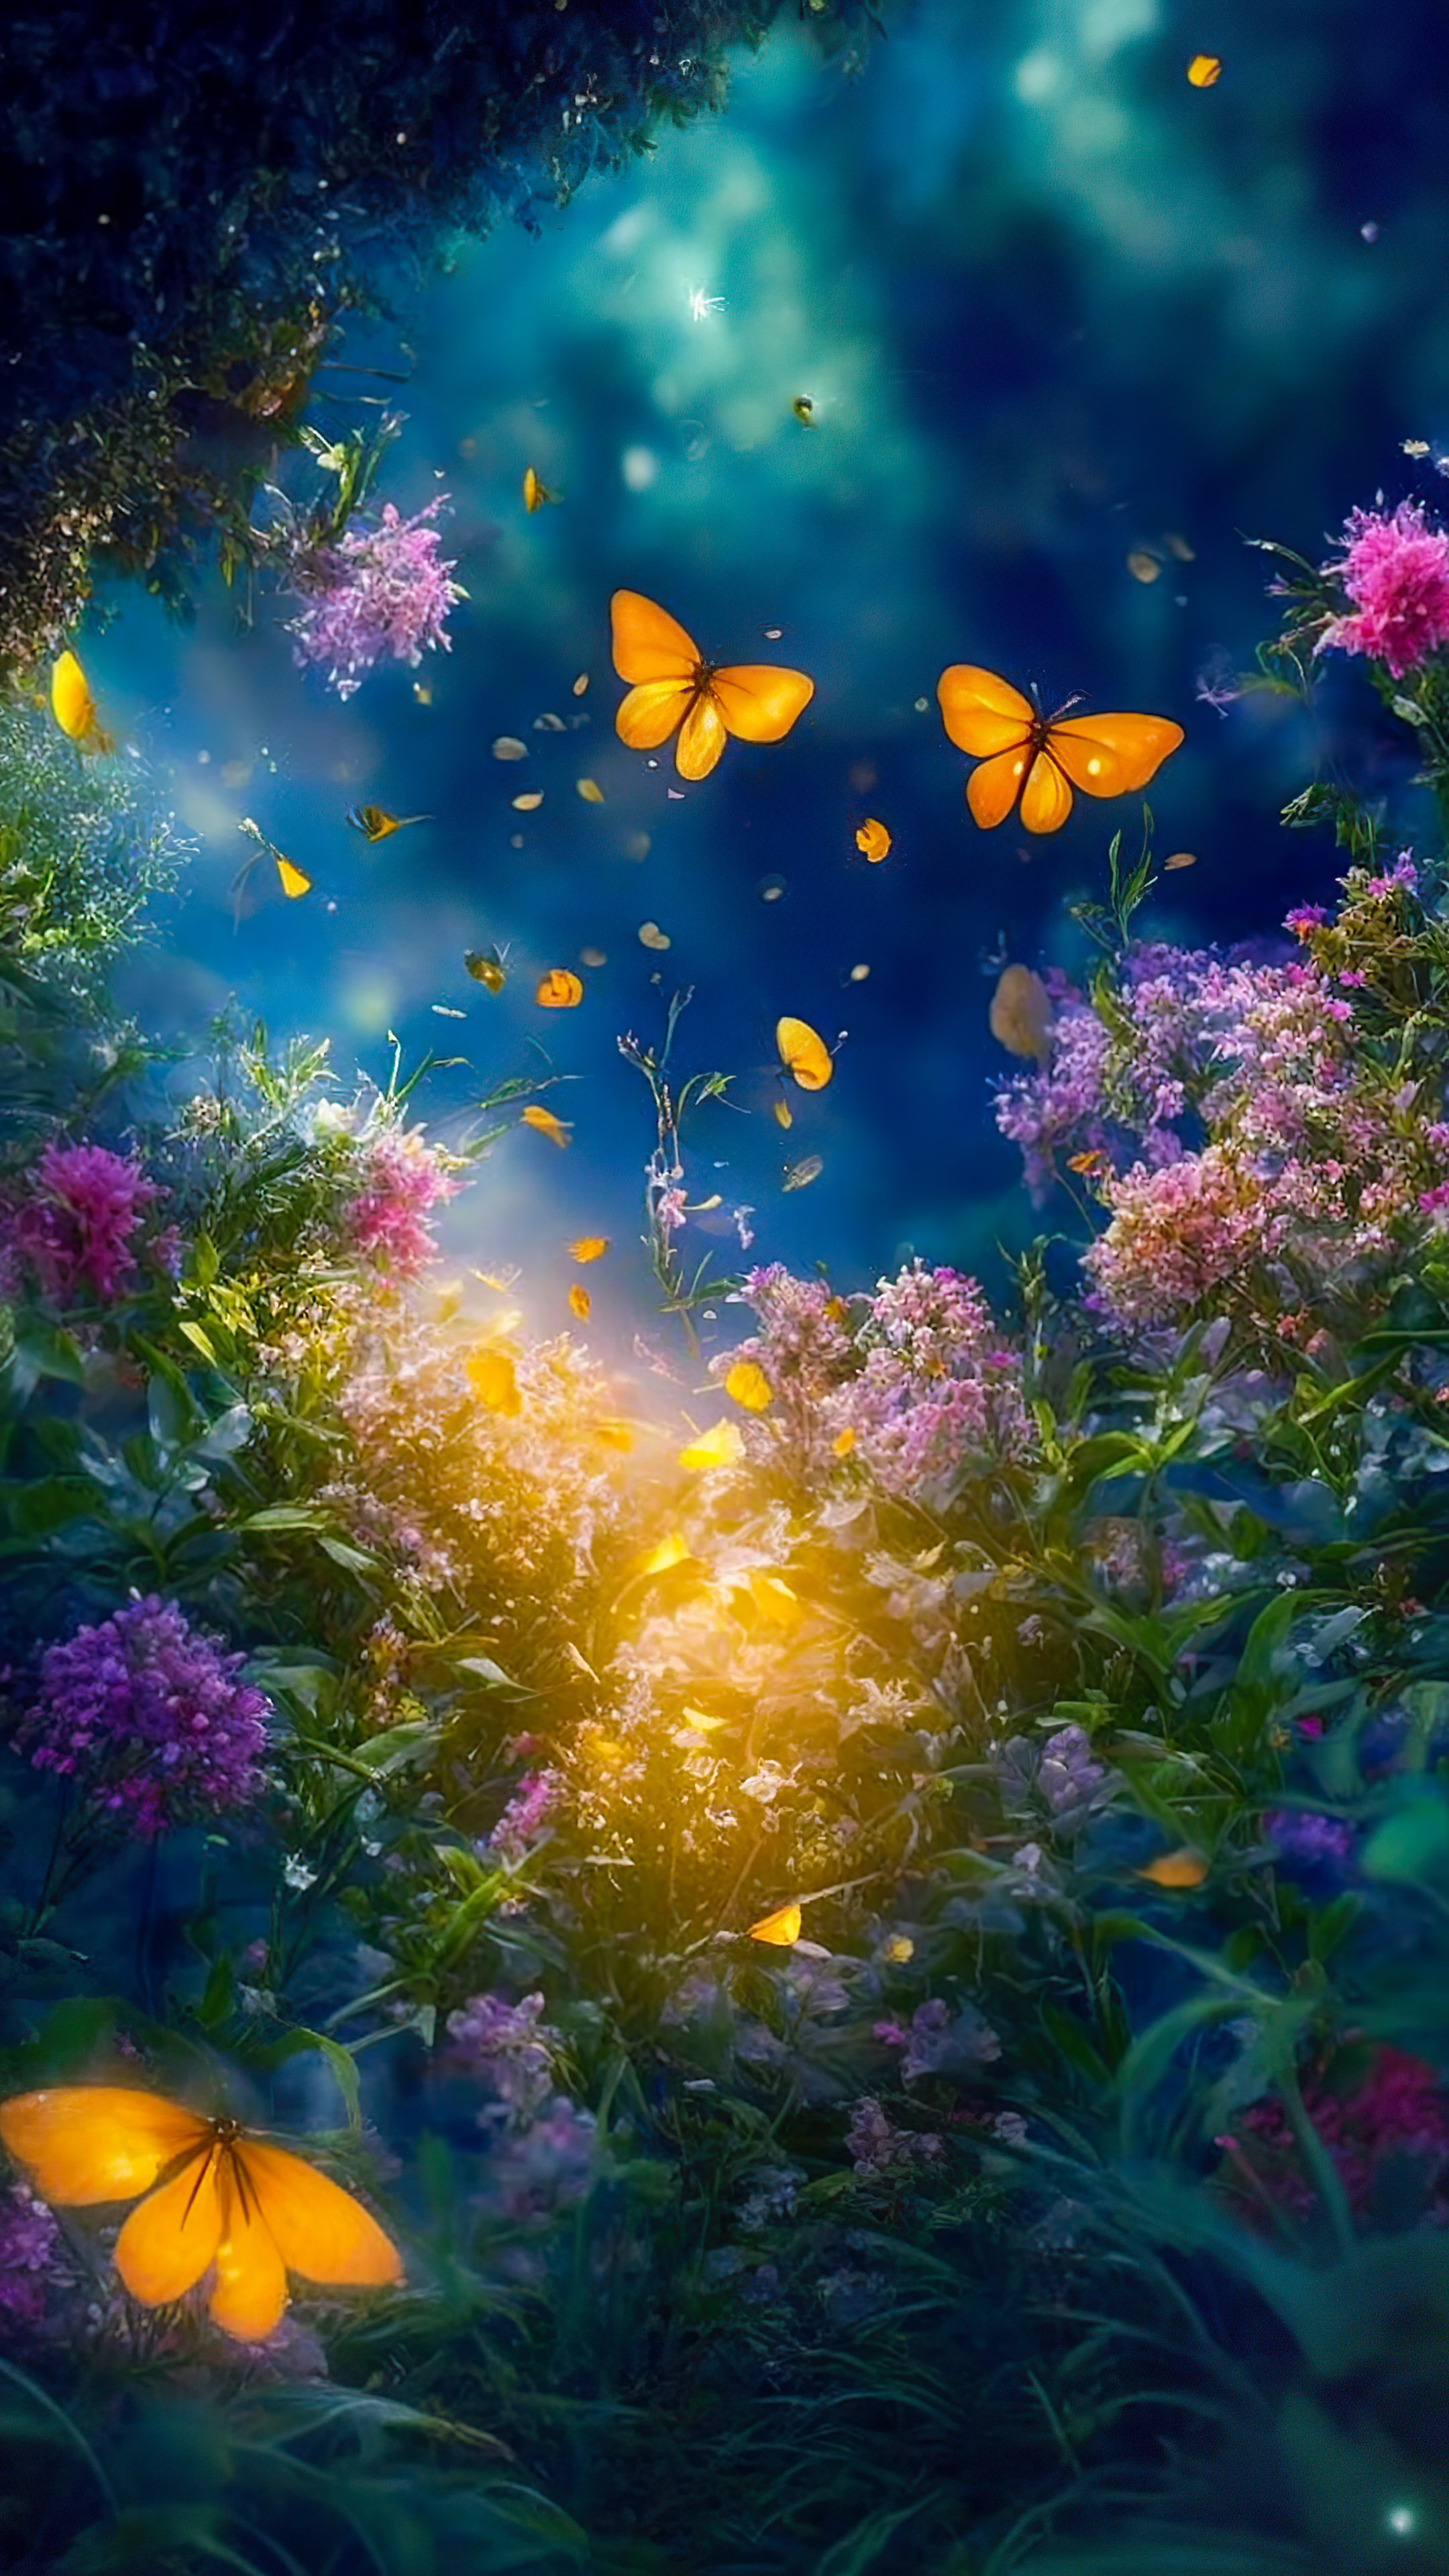 Get lost in the whimsical charm of a magical garden at night, where fireflies dance around vibrant, luminescent flowers with our 4K nature wallpaper for phone.